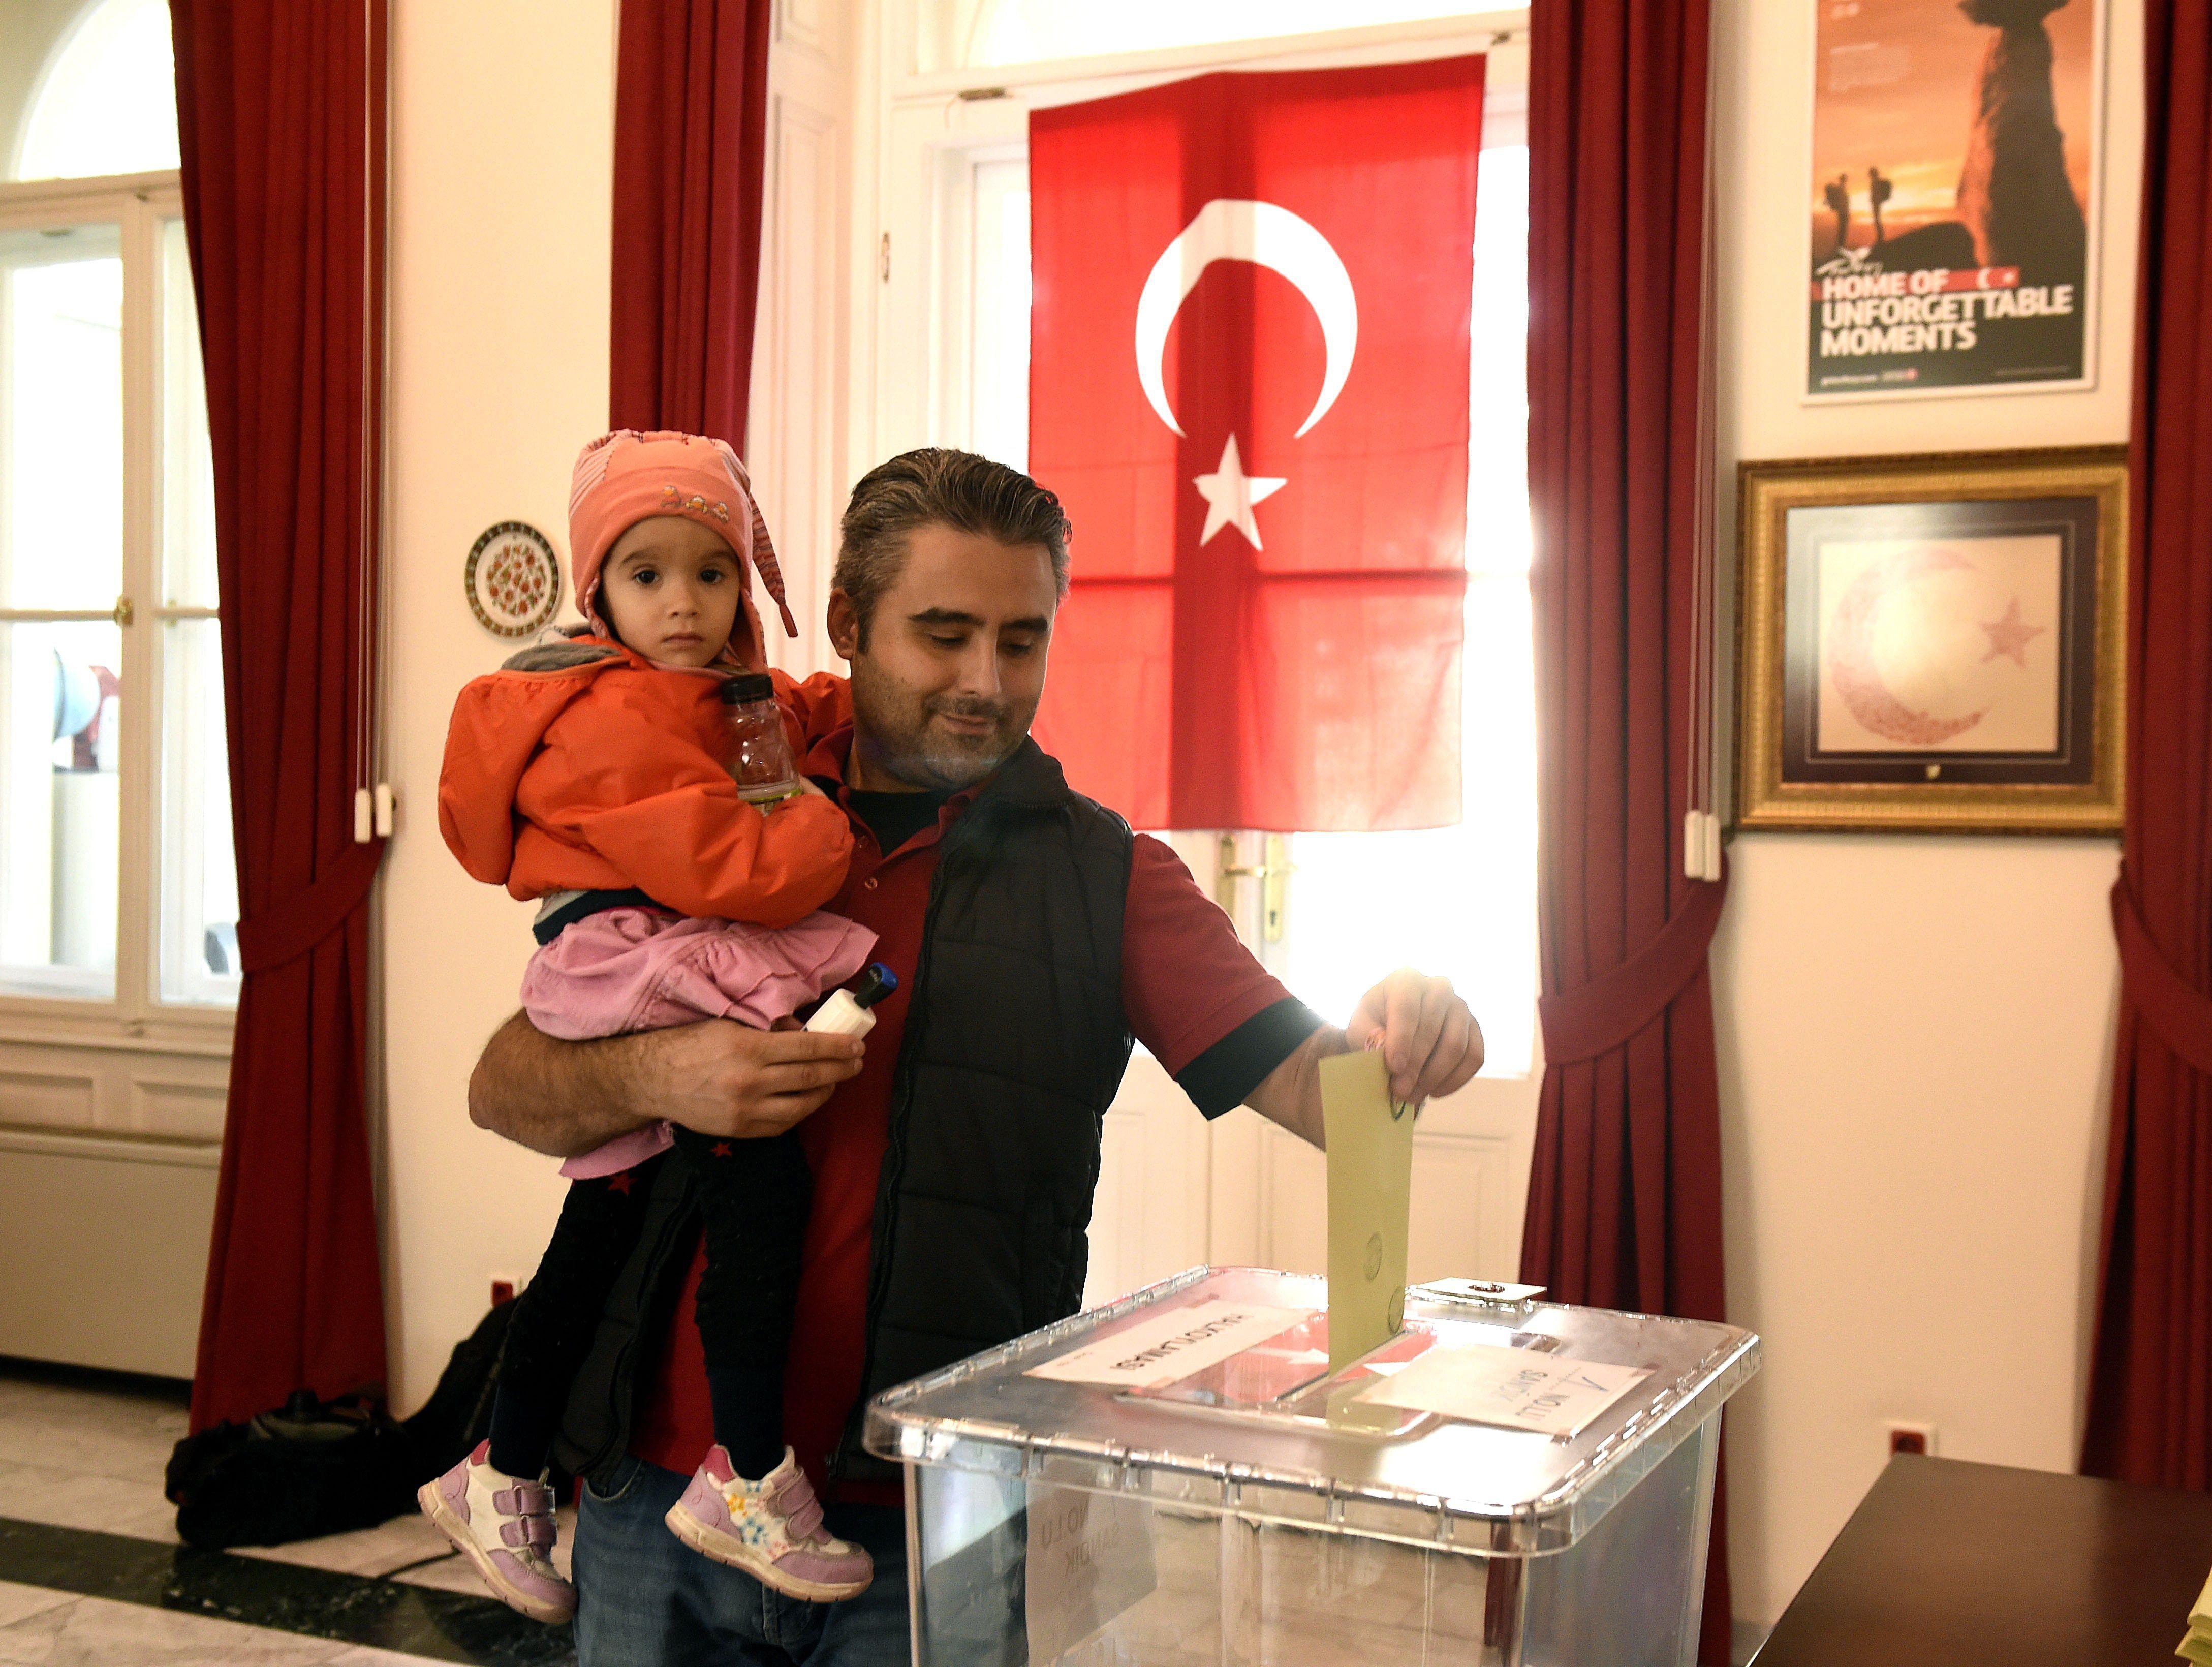 A Turkish citizen living in Hungary holds his daughter as he casts his vote in a Turkish referendum about amendments of the constitution to expand the presidential powers, in the Turkish embassy in Budapest, Hungary, Sunday, April 9, 2017, one week ahead of the referendum to be held in Turkey. (Noemi Bruzak/MTI via AP)